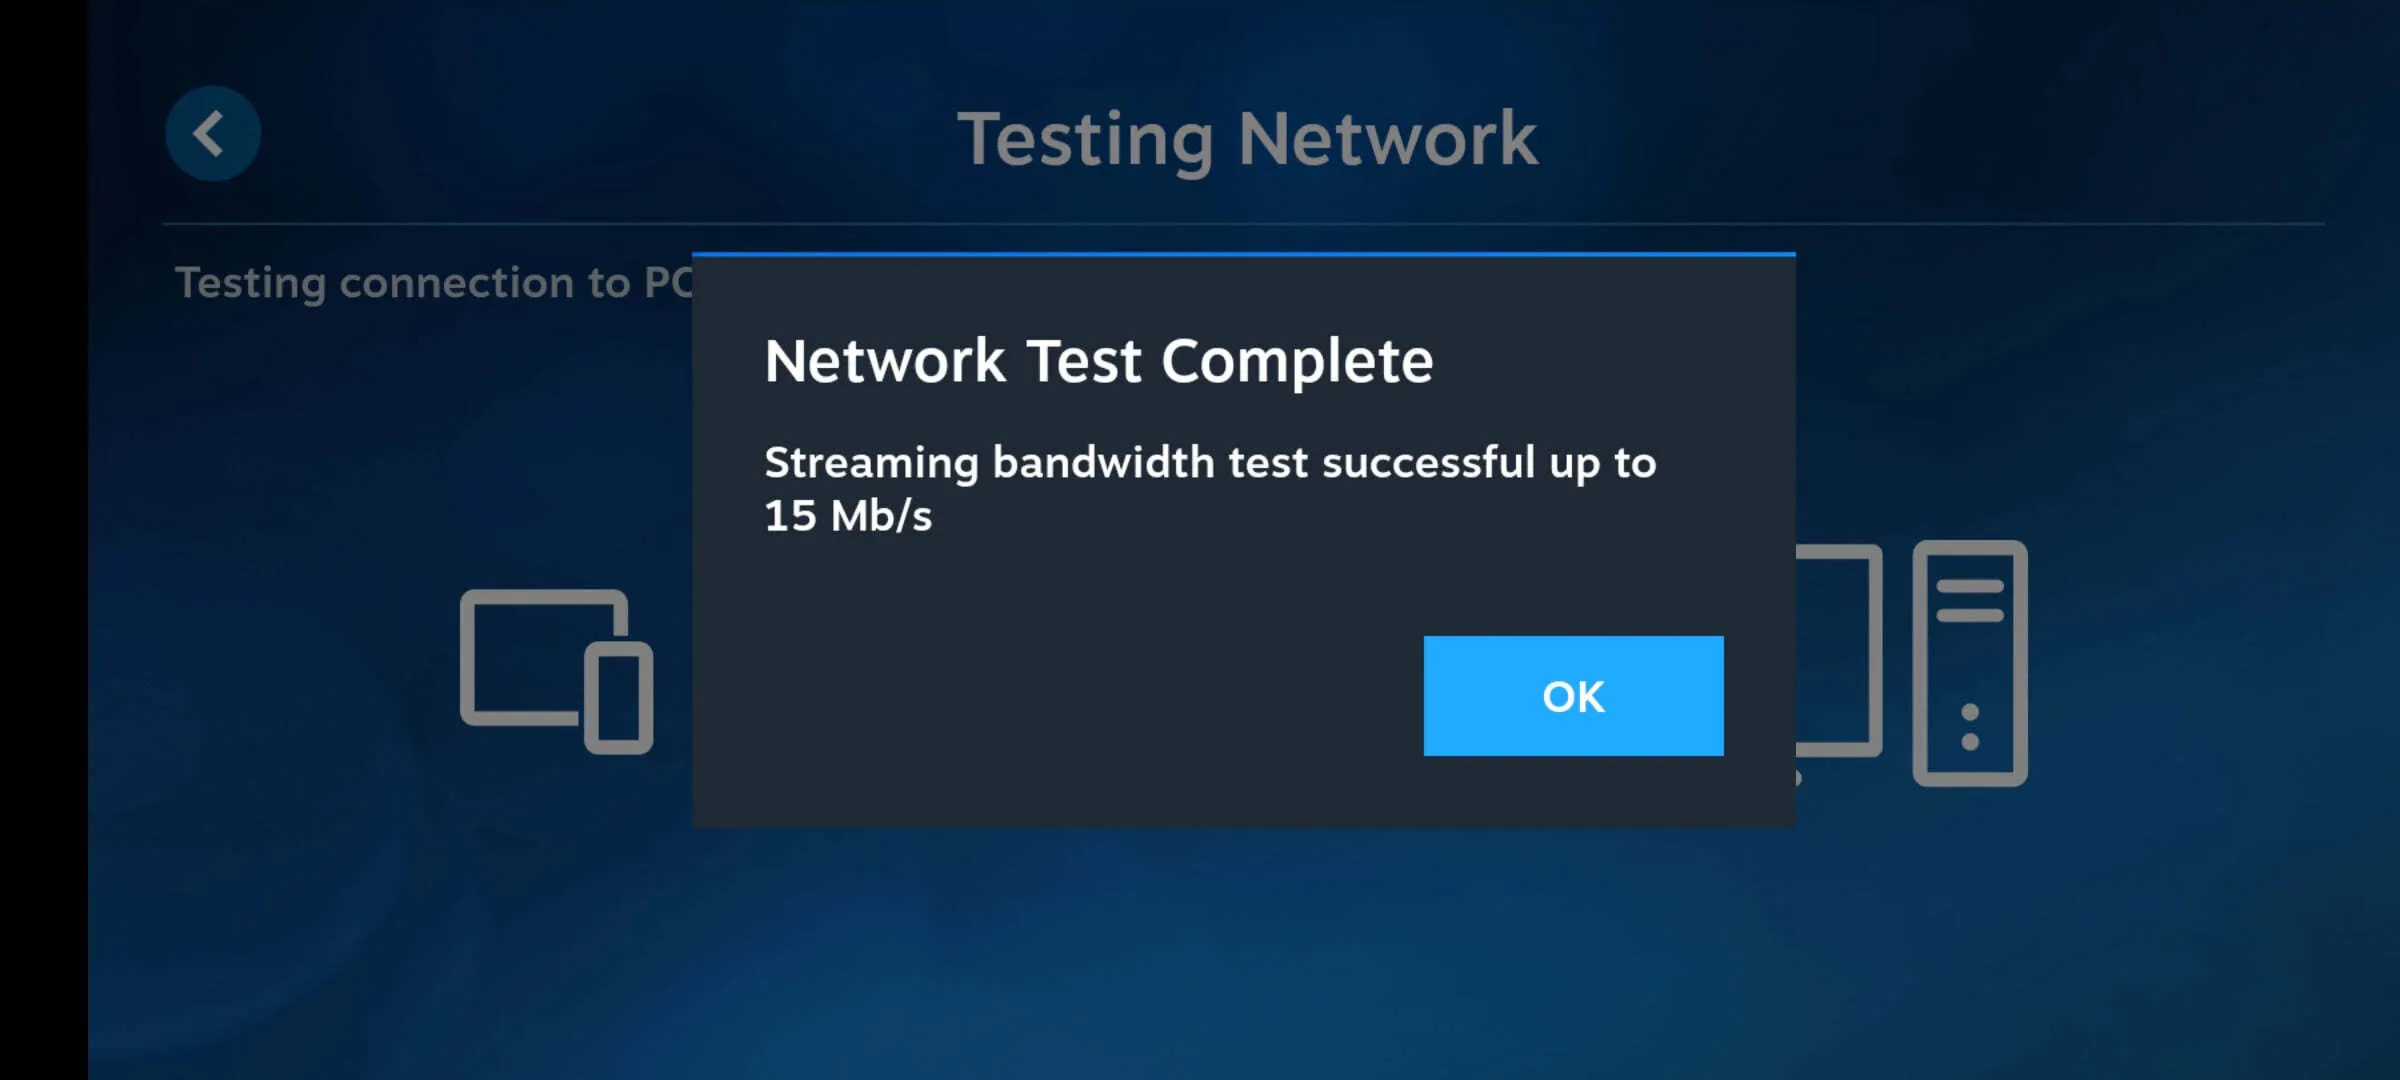 Wait network connection test to finish